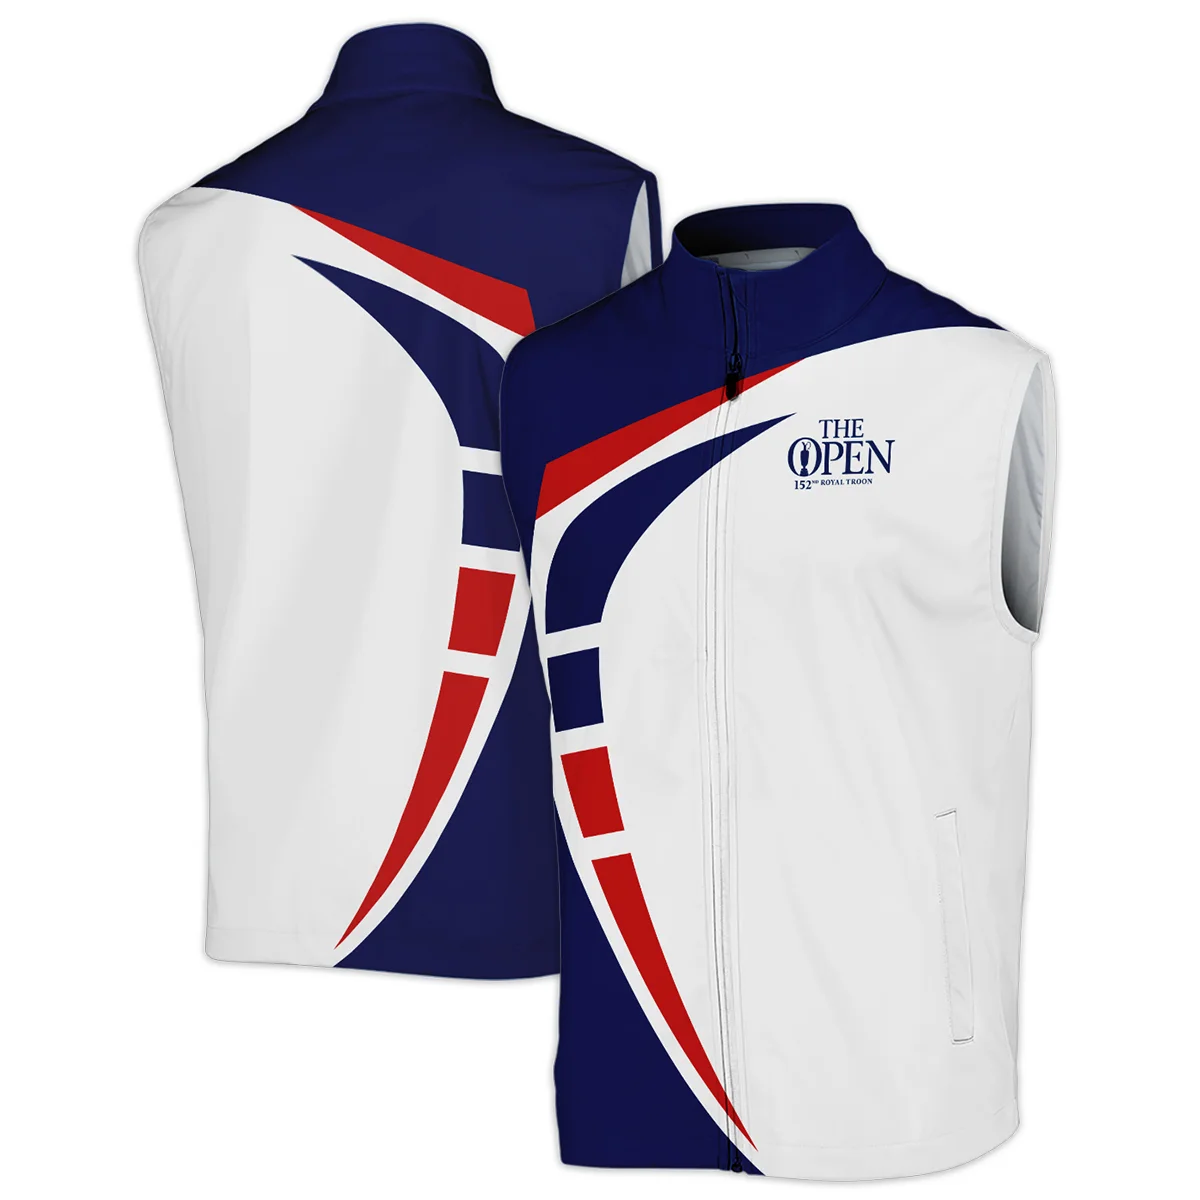 152nd Open Championship Rolex White Blue Red Pattern Background Zipper Hoodie Shirt All Over Prints HOTOP270624A03ROXZHD